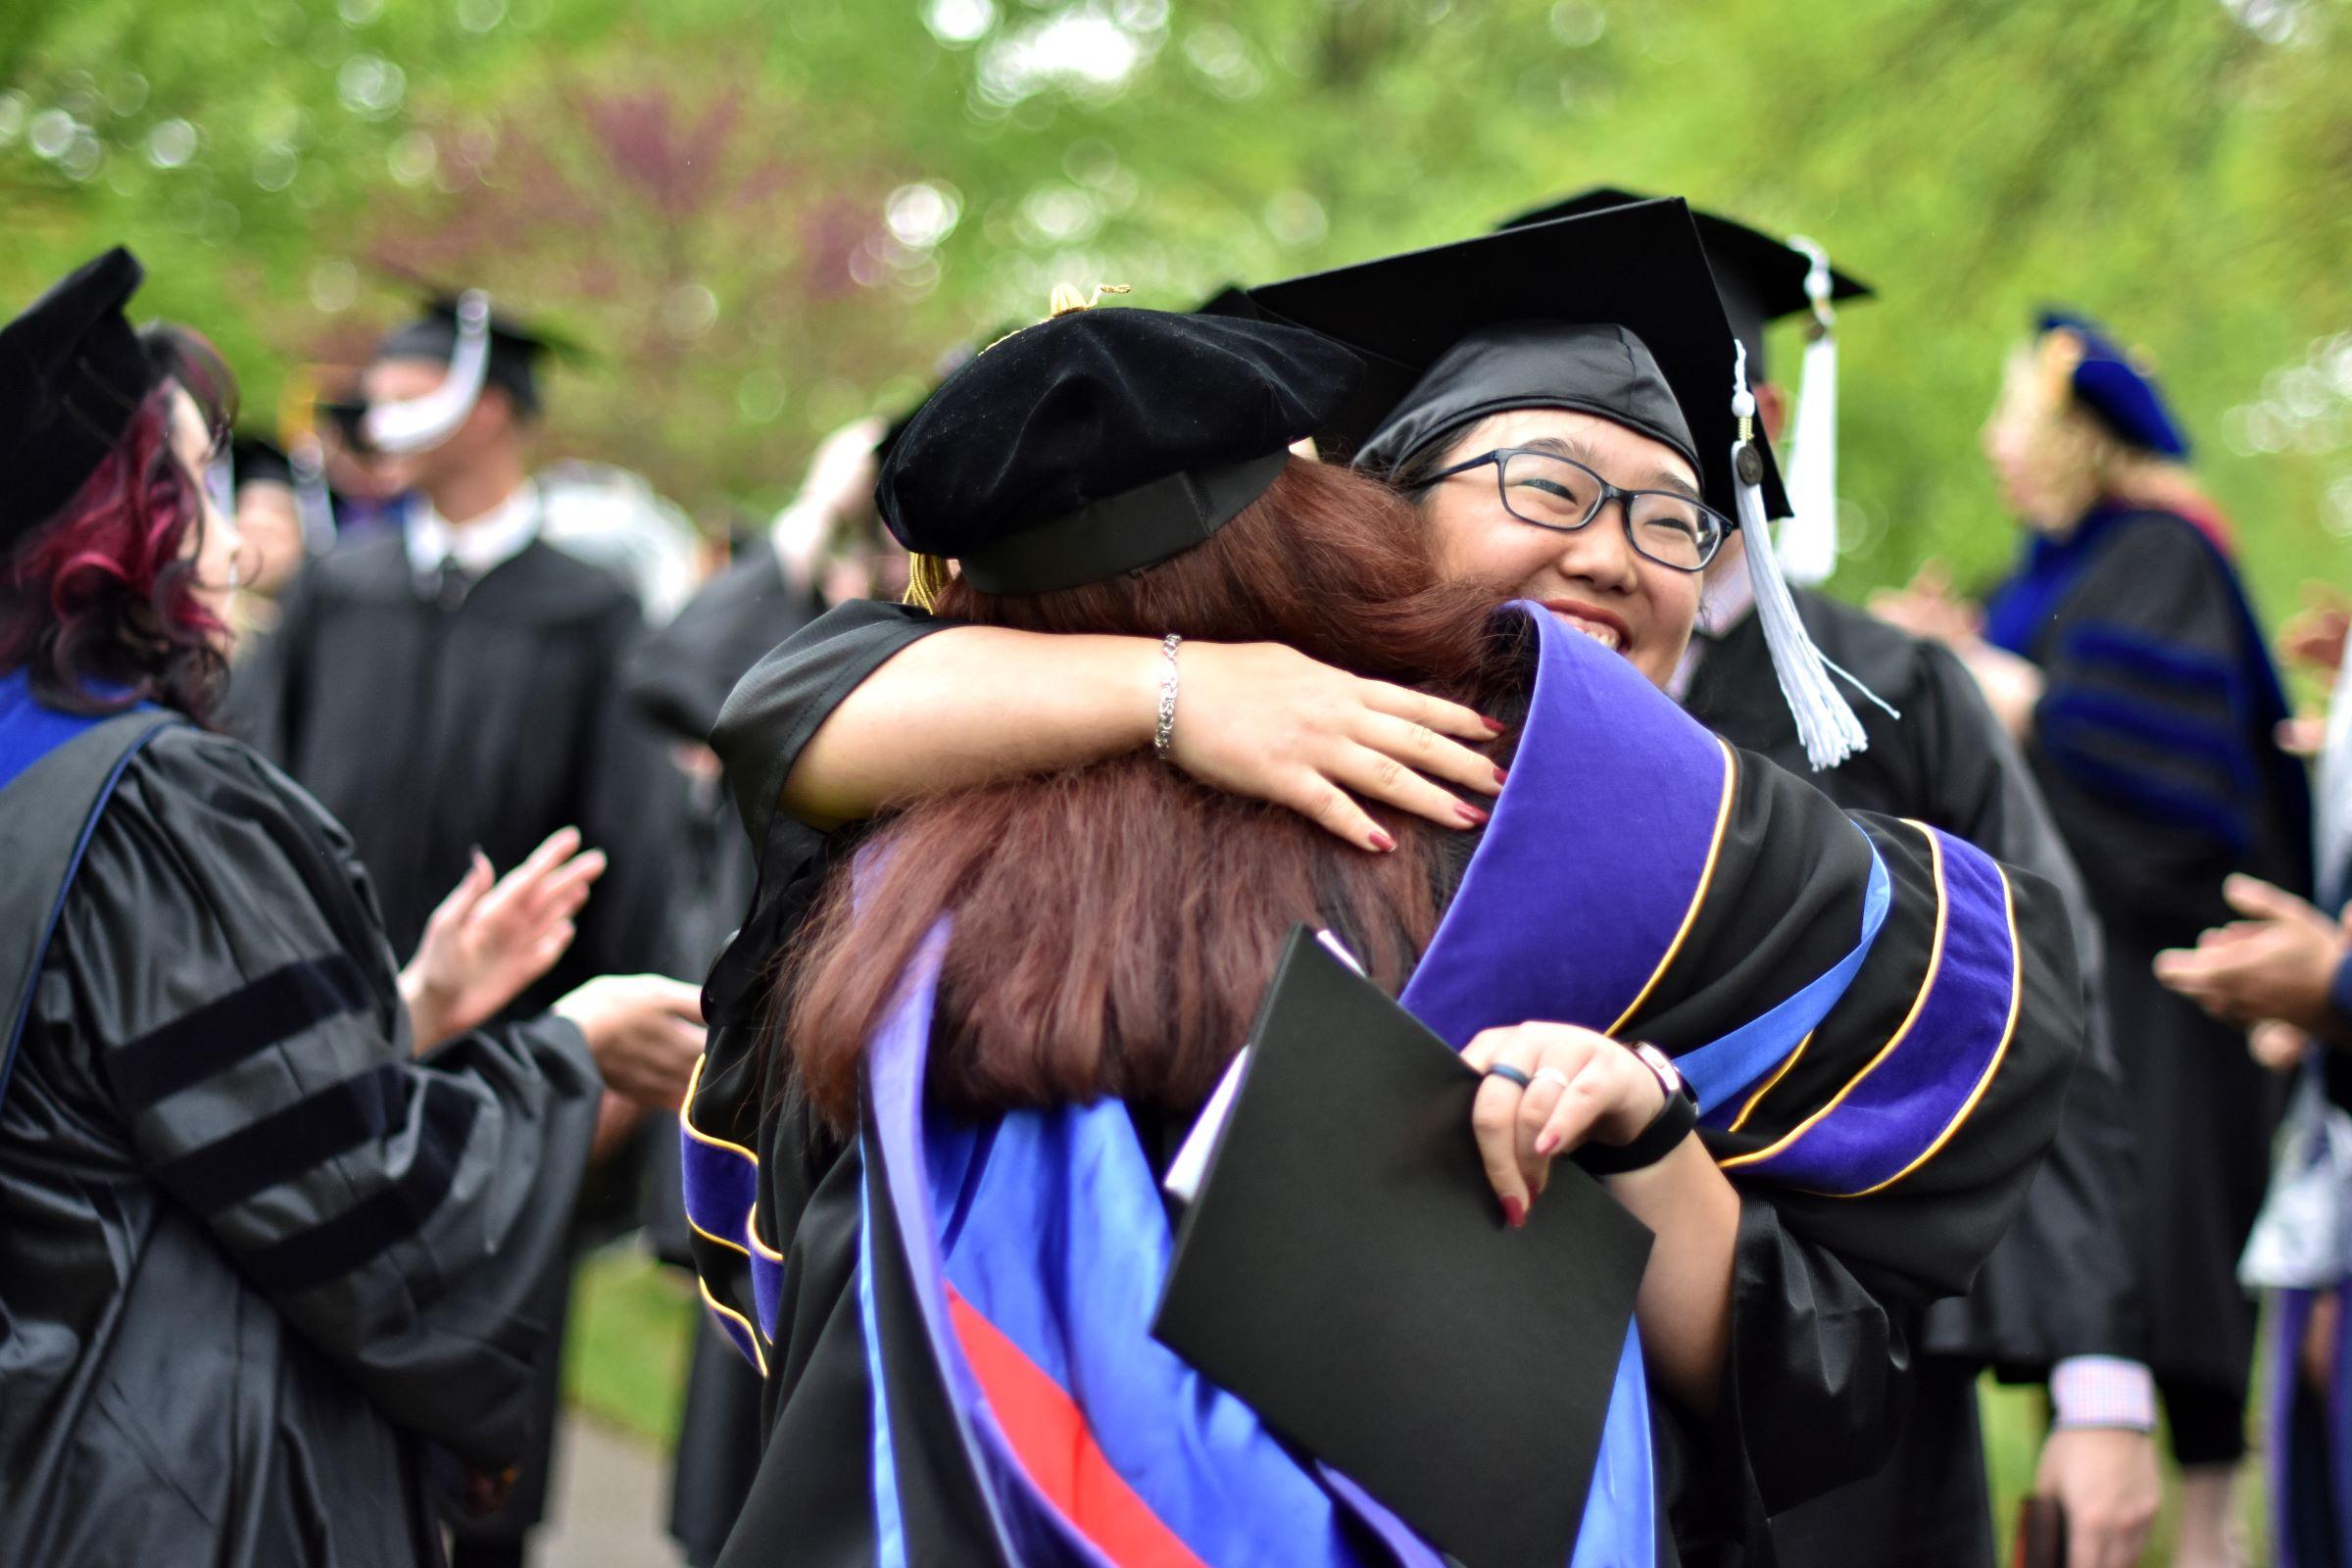 Student and faculty member embrace after the ceremony